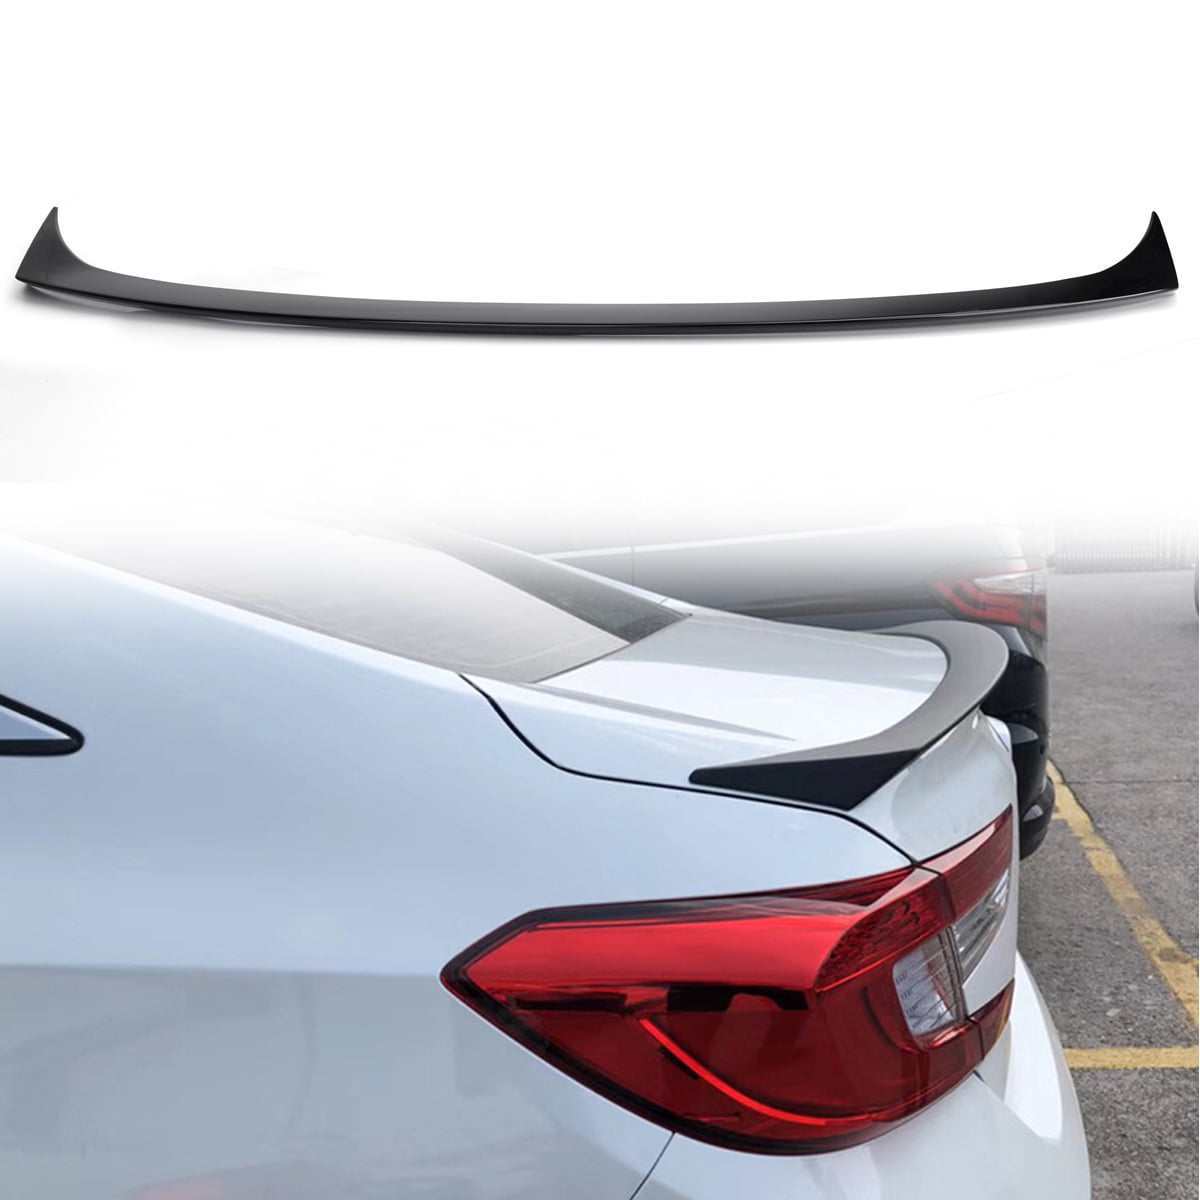 FOR Nissan Altima 2019 ABS Rear Tail Trunk Spoiler Wing Lip Trim Gloss Black 